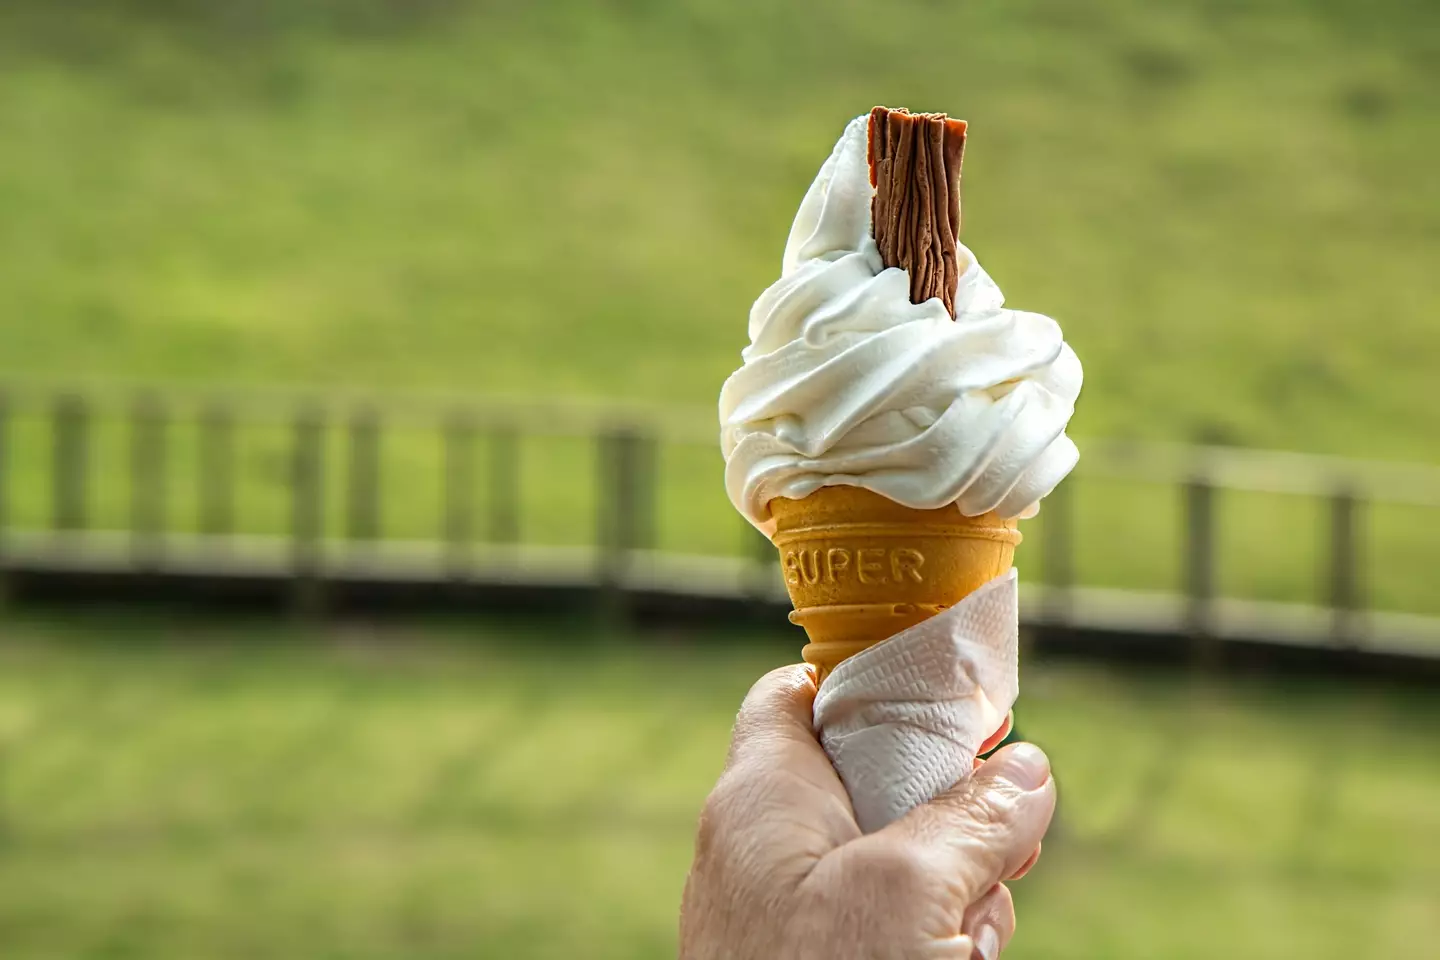 "If something really upsets you, go for a walk around the factory. Get an ice cream cone. Just don't use Twitter."